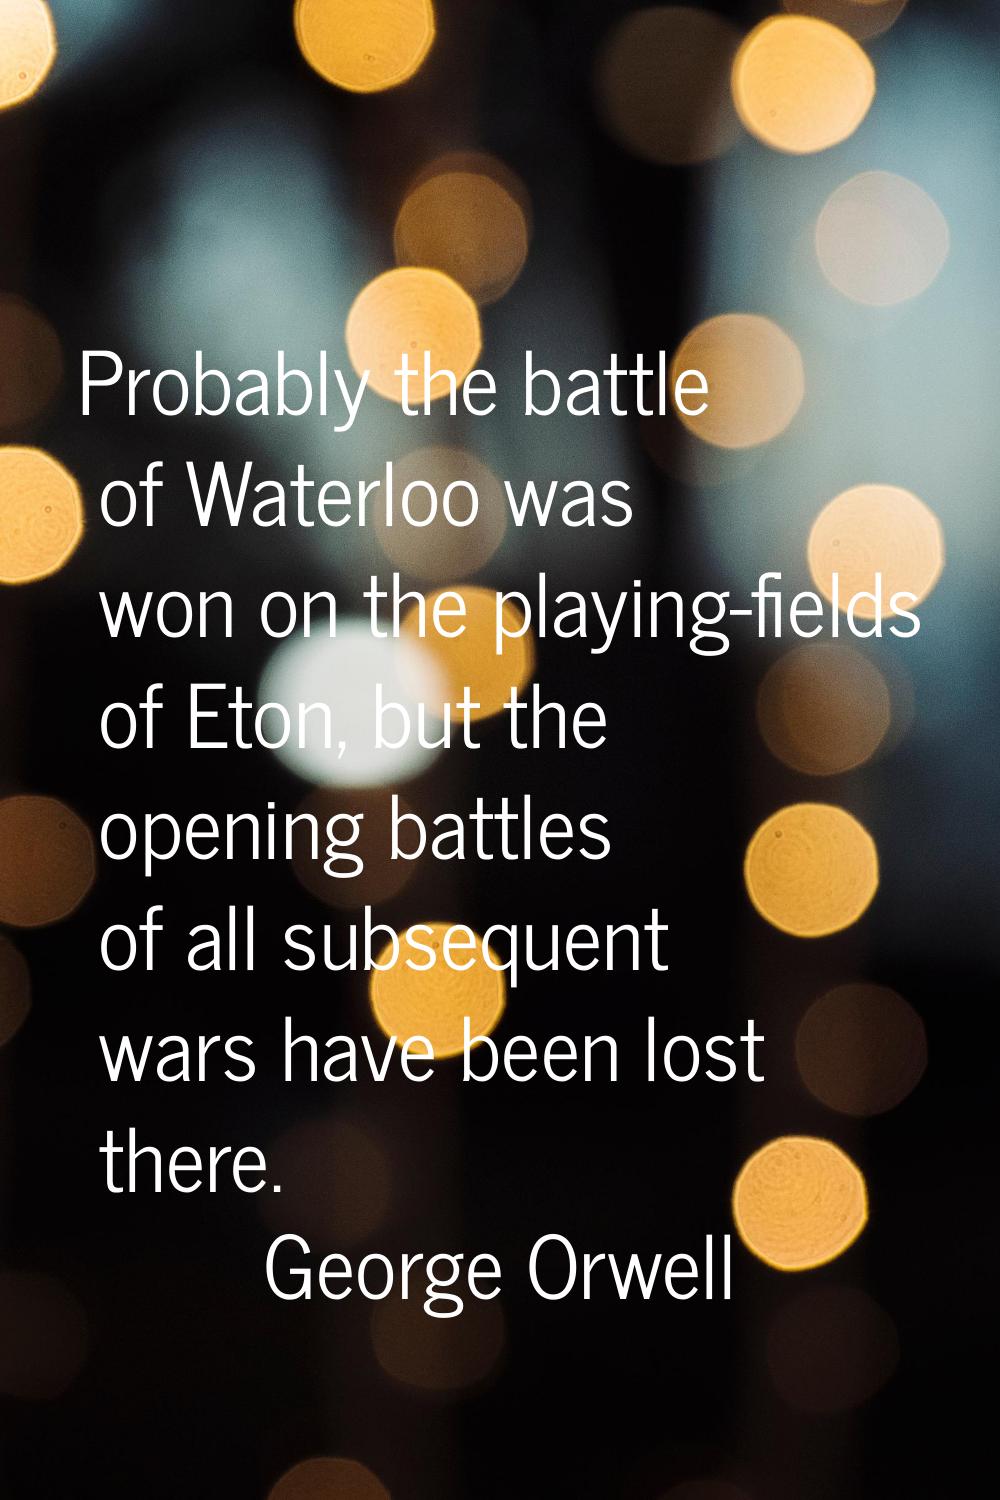 Probably the battle of Waterloo was won on the playing-fields of Eton, but the opening battles of a